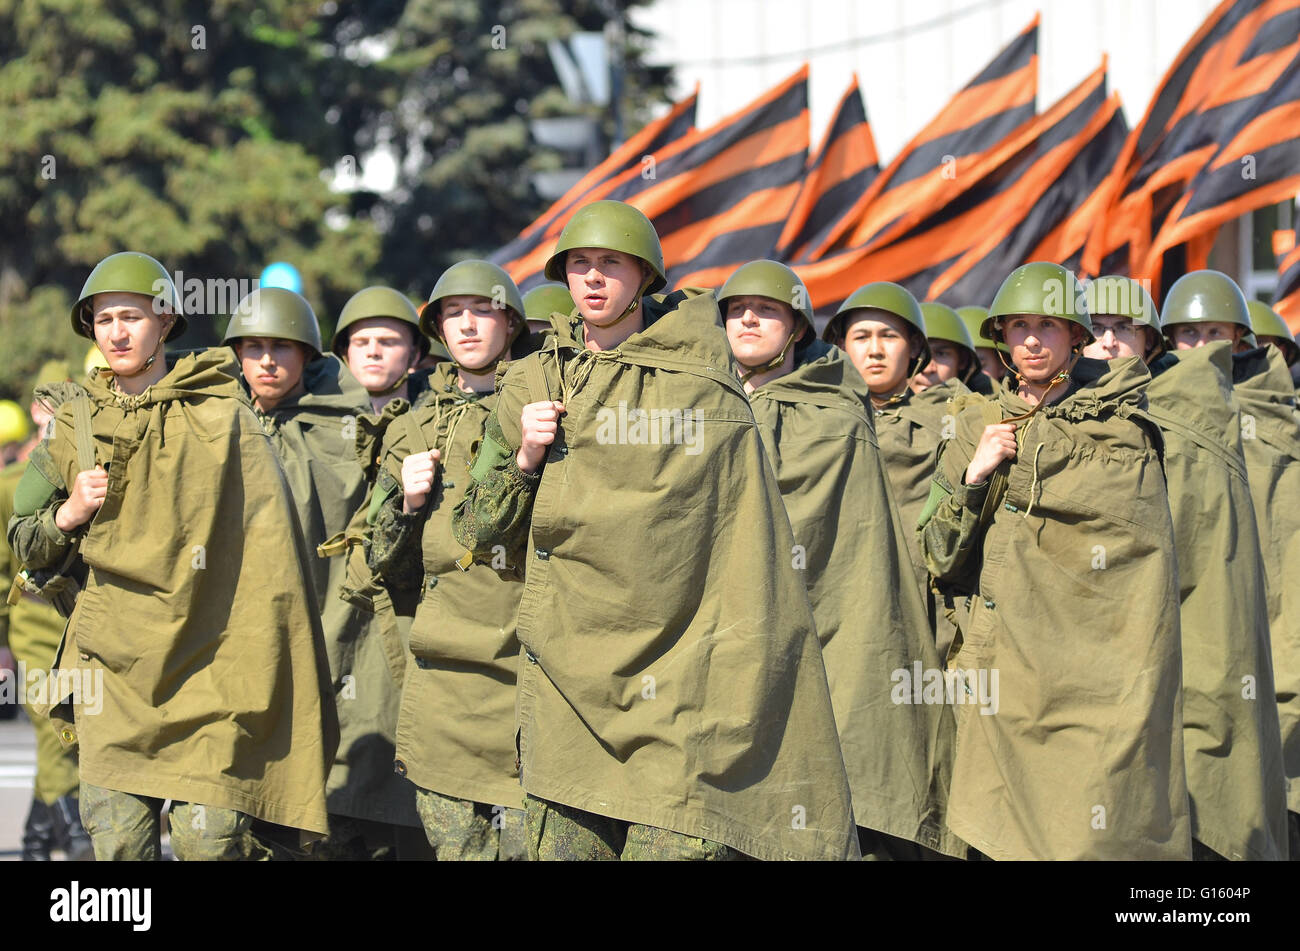 Tambov, Tambov region, Russia. 9th May, 2016. May 9 in Russia in all cities and regions celebrate the day of Victory of Russian people in the great Patriotic war. In Tambov may 9, 2016 hosted 71 Victory Parade © Aleksei Sukhorukov/ZUMA Wire/Alamy Live News Stock Photo